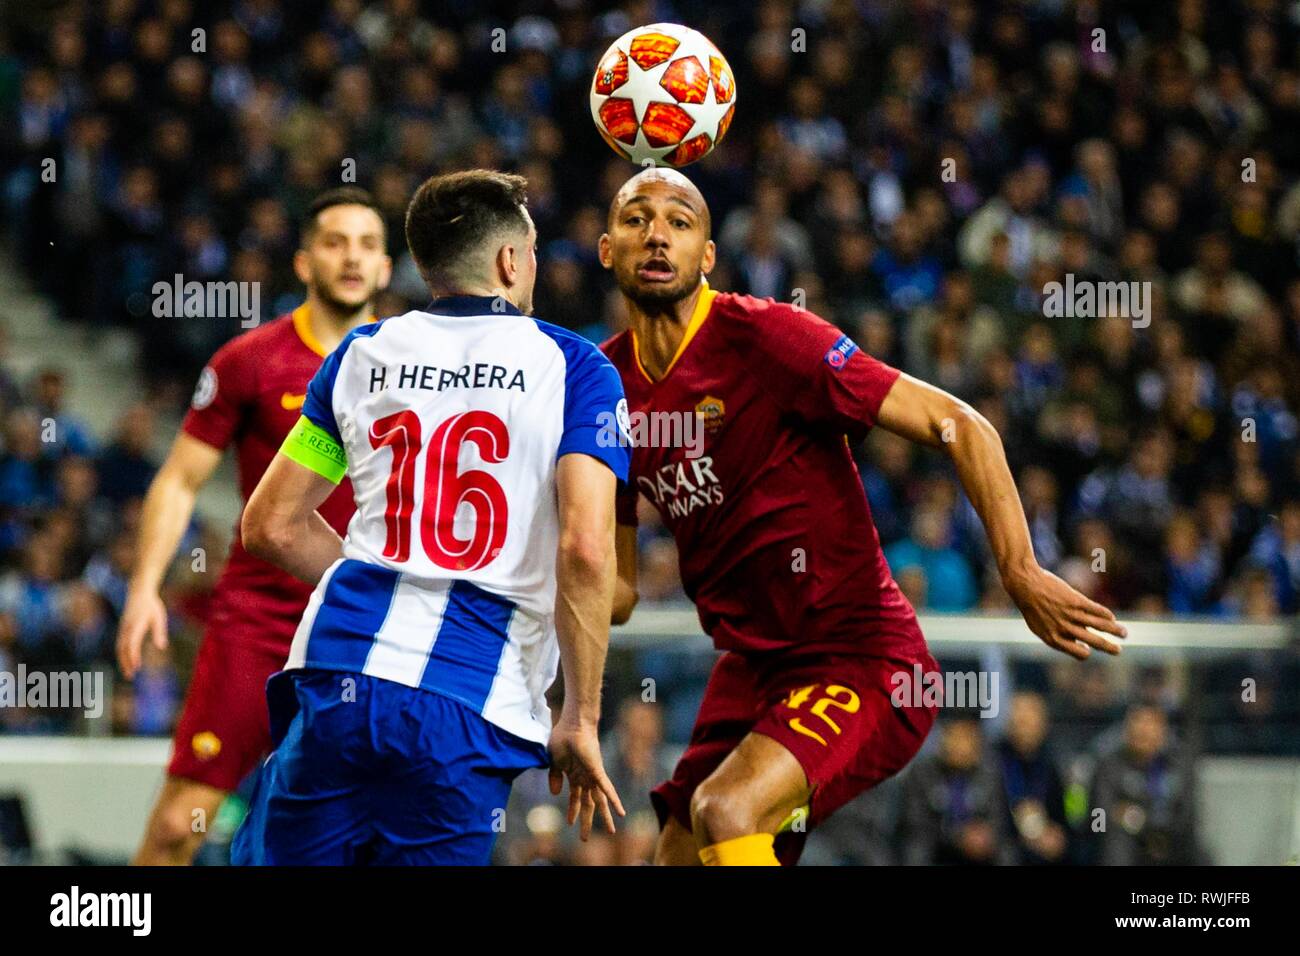 FC Porto's player Héctor Herrera (L) vies for the ball with AS Roma's player Steven Nzonzi (R) during the match against AS Roma for the UEFA Champions League round 16th 2nd leg at Dragon Stadium in Porto. Final Score: FC Porto 3-1 AS Roma Stock Photo